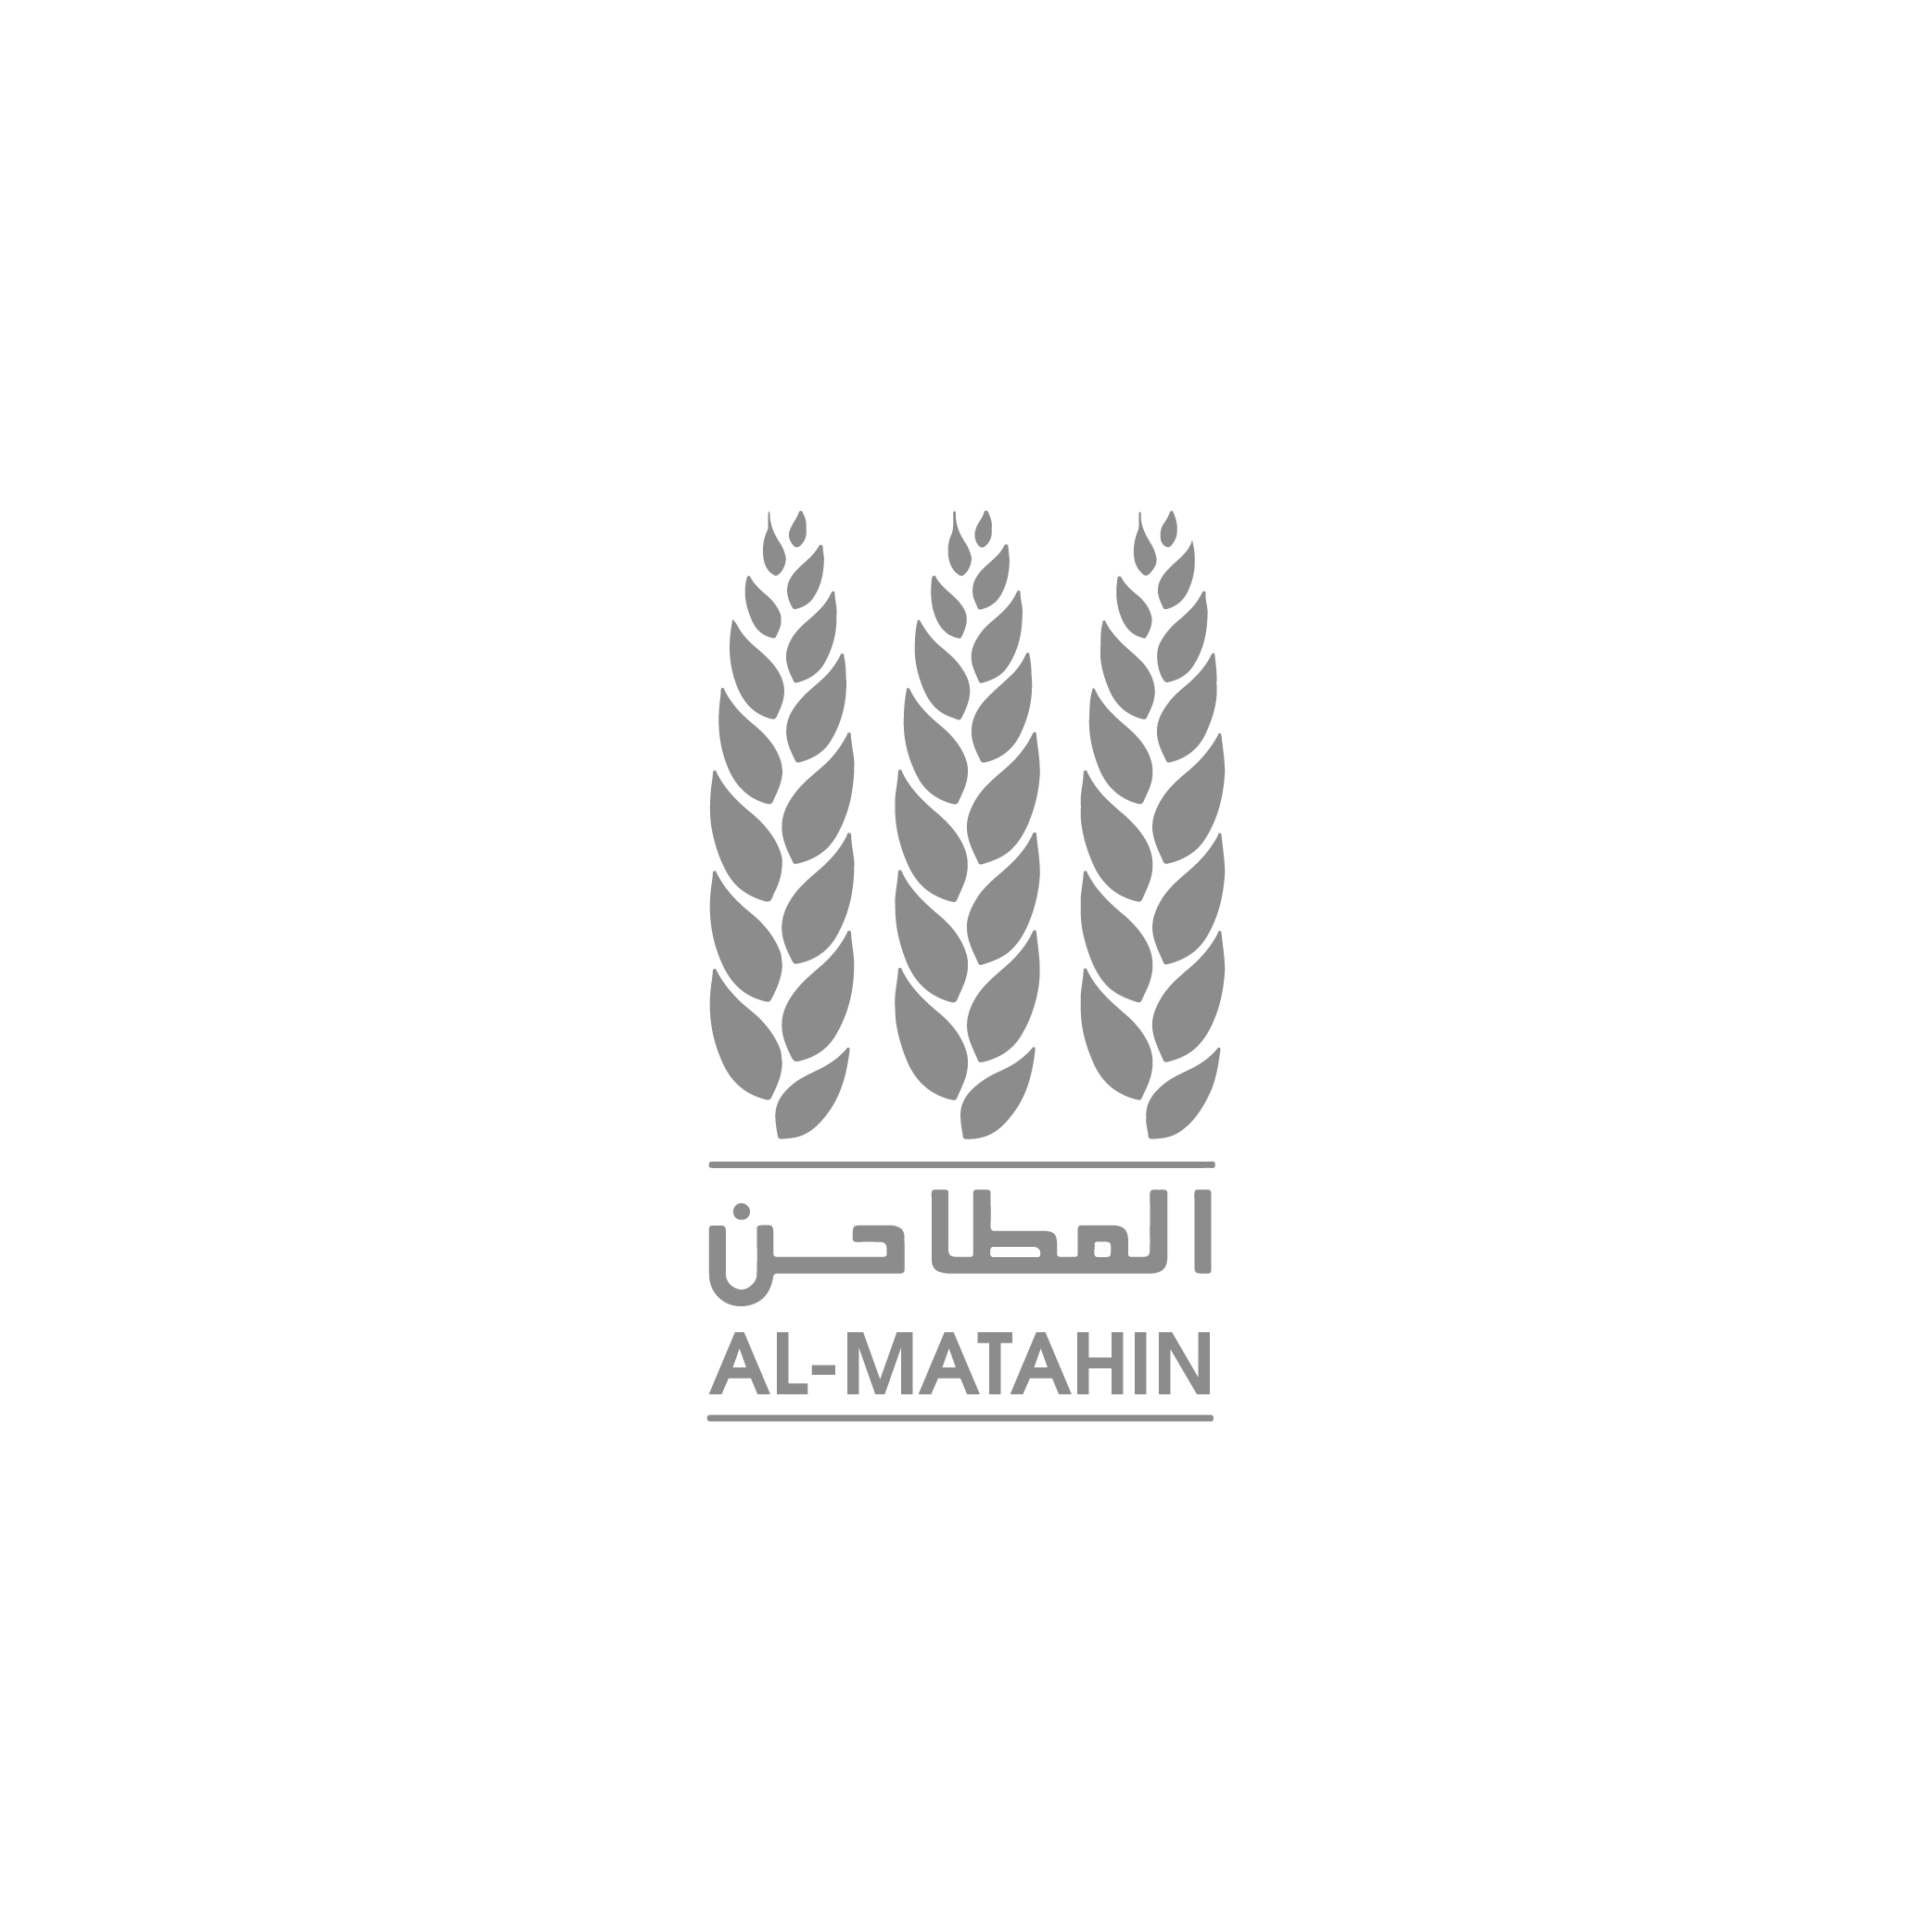 Al-Matahin has conducted the AGM electronically